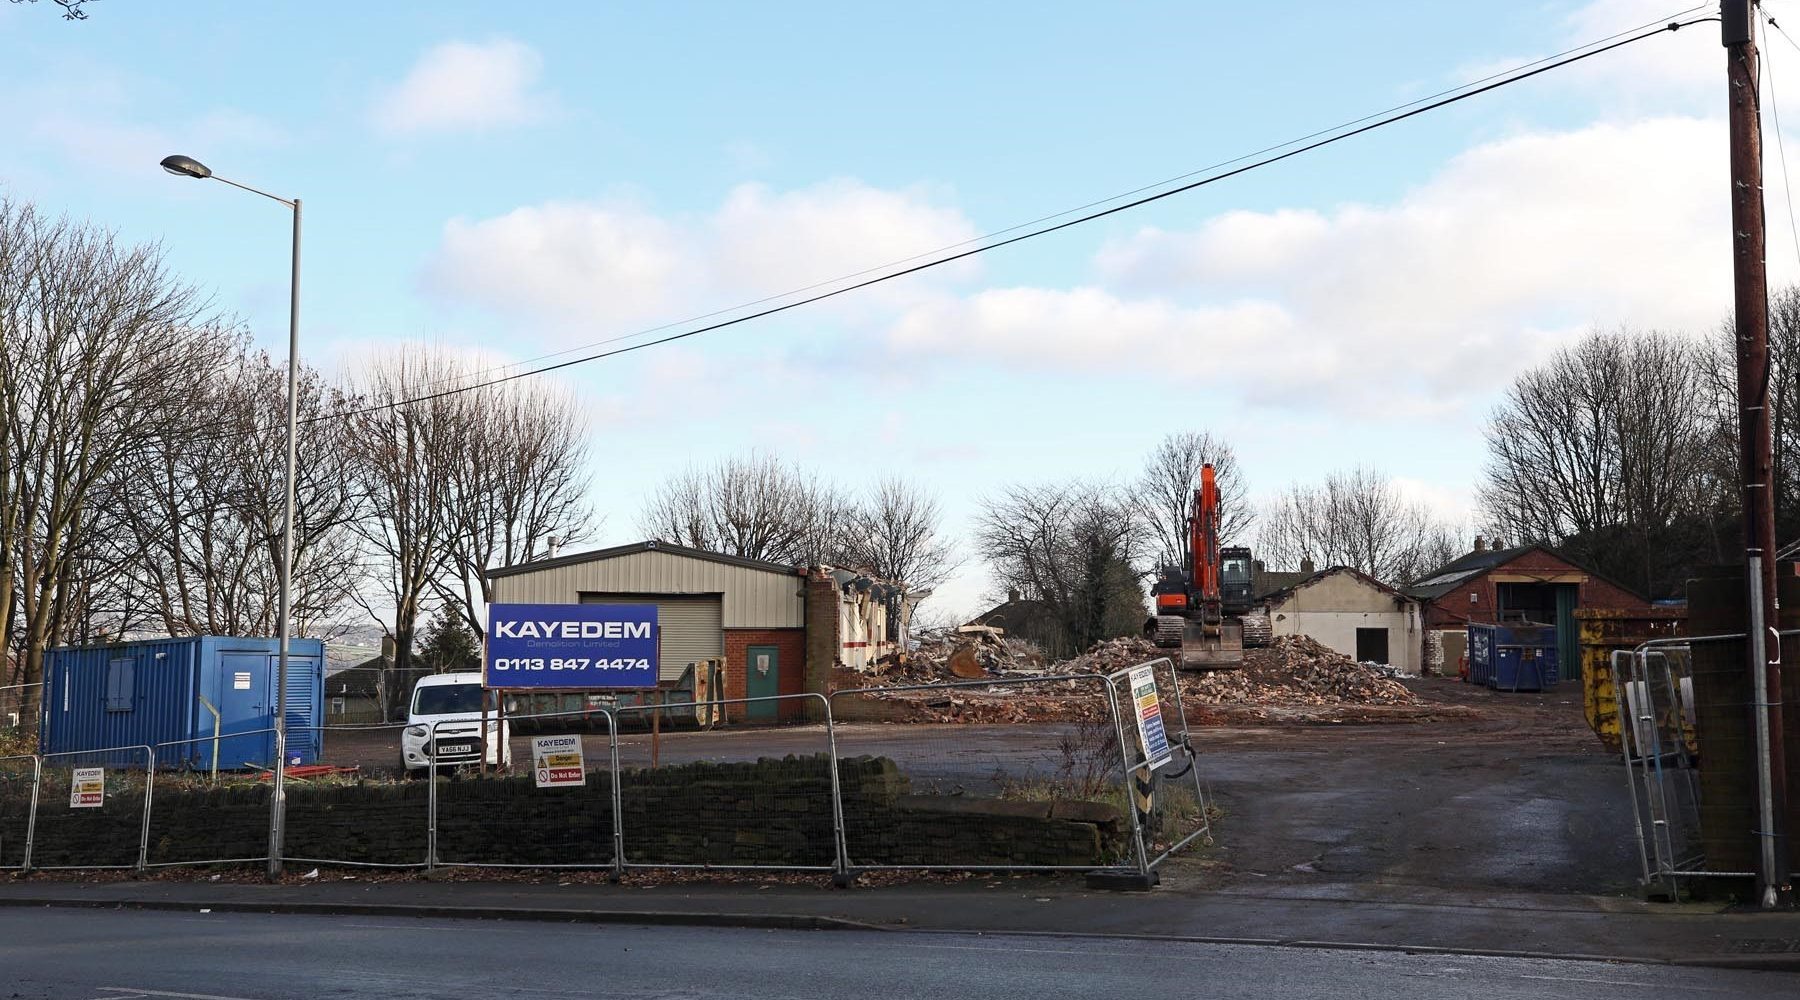 Homes plan for former industrial site in Idle